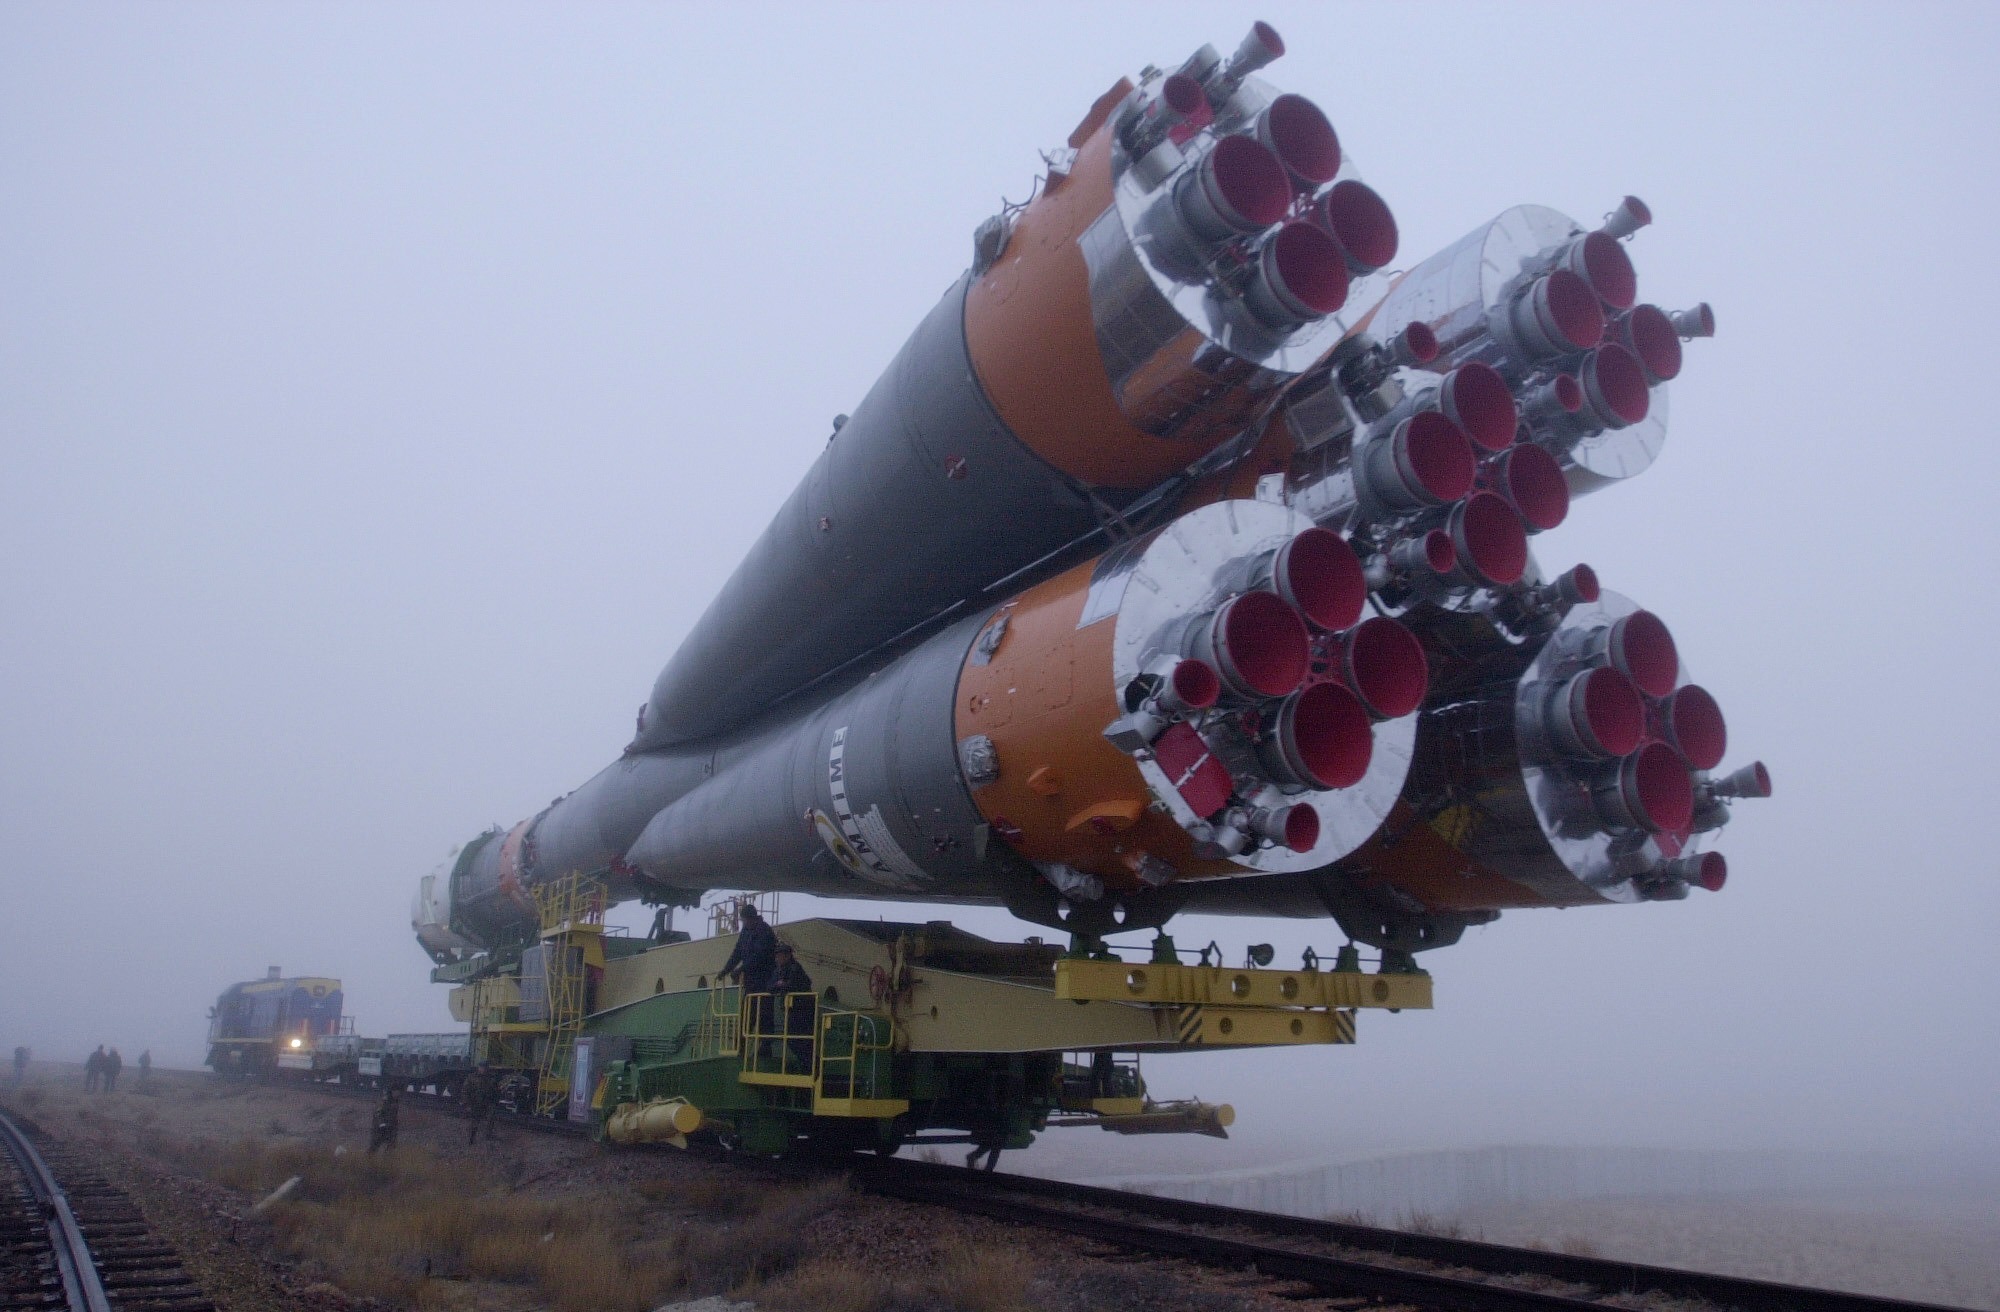 Expedition 1 (Soyuz TM-31) rocket on its way to the launch pad in Kazakhstan. (NASA photo)